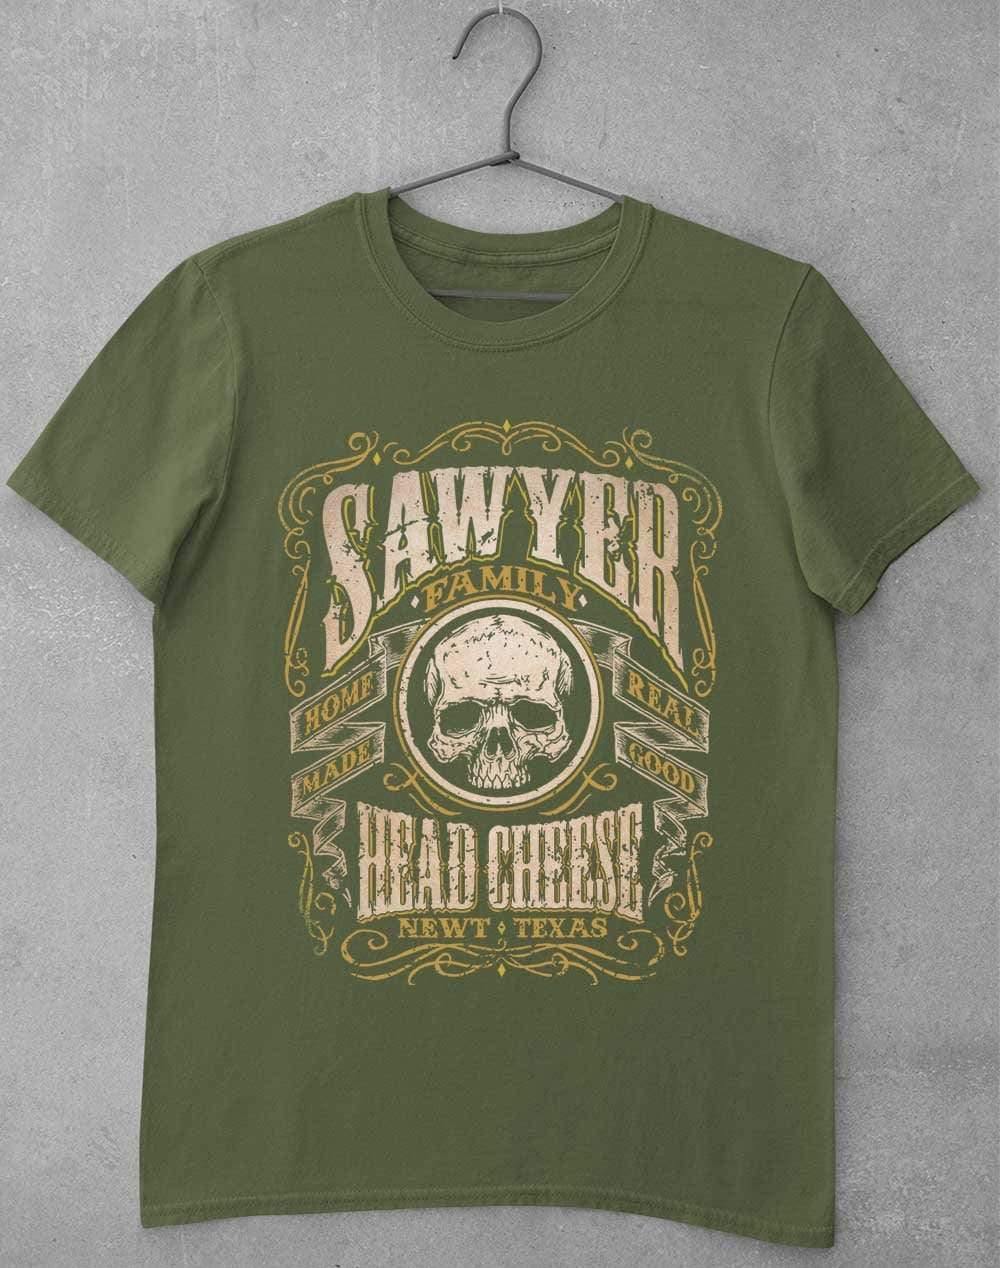 Sawyer Family Head Cheese T-Shirt S / Military Green  - Off World Tees